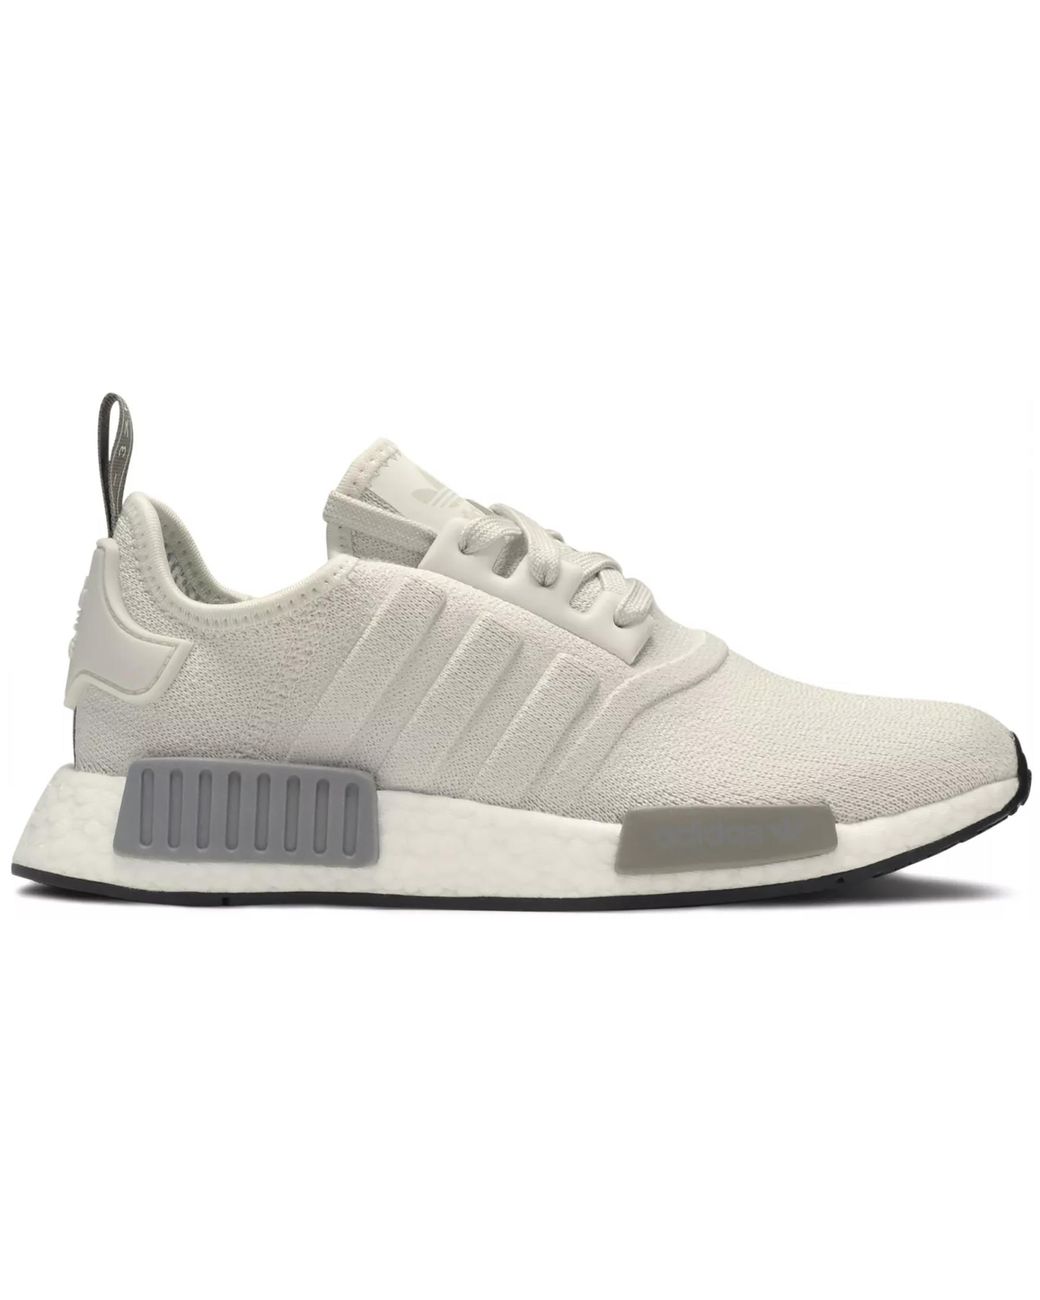 all white nmd r1 womens